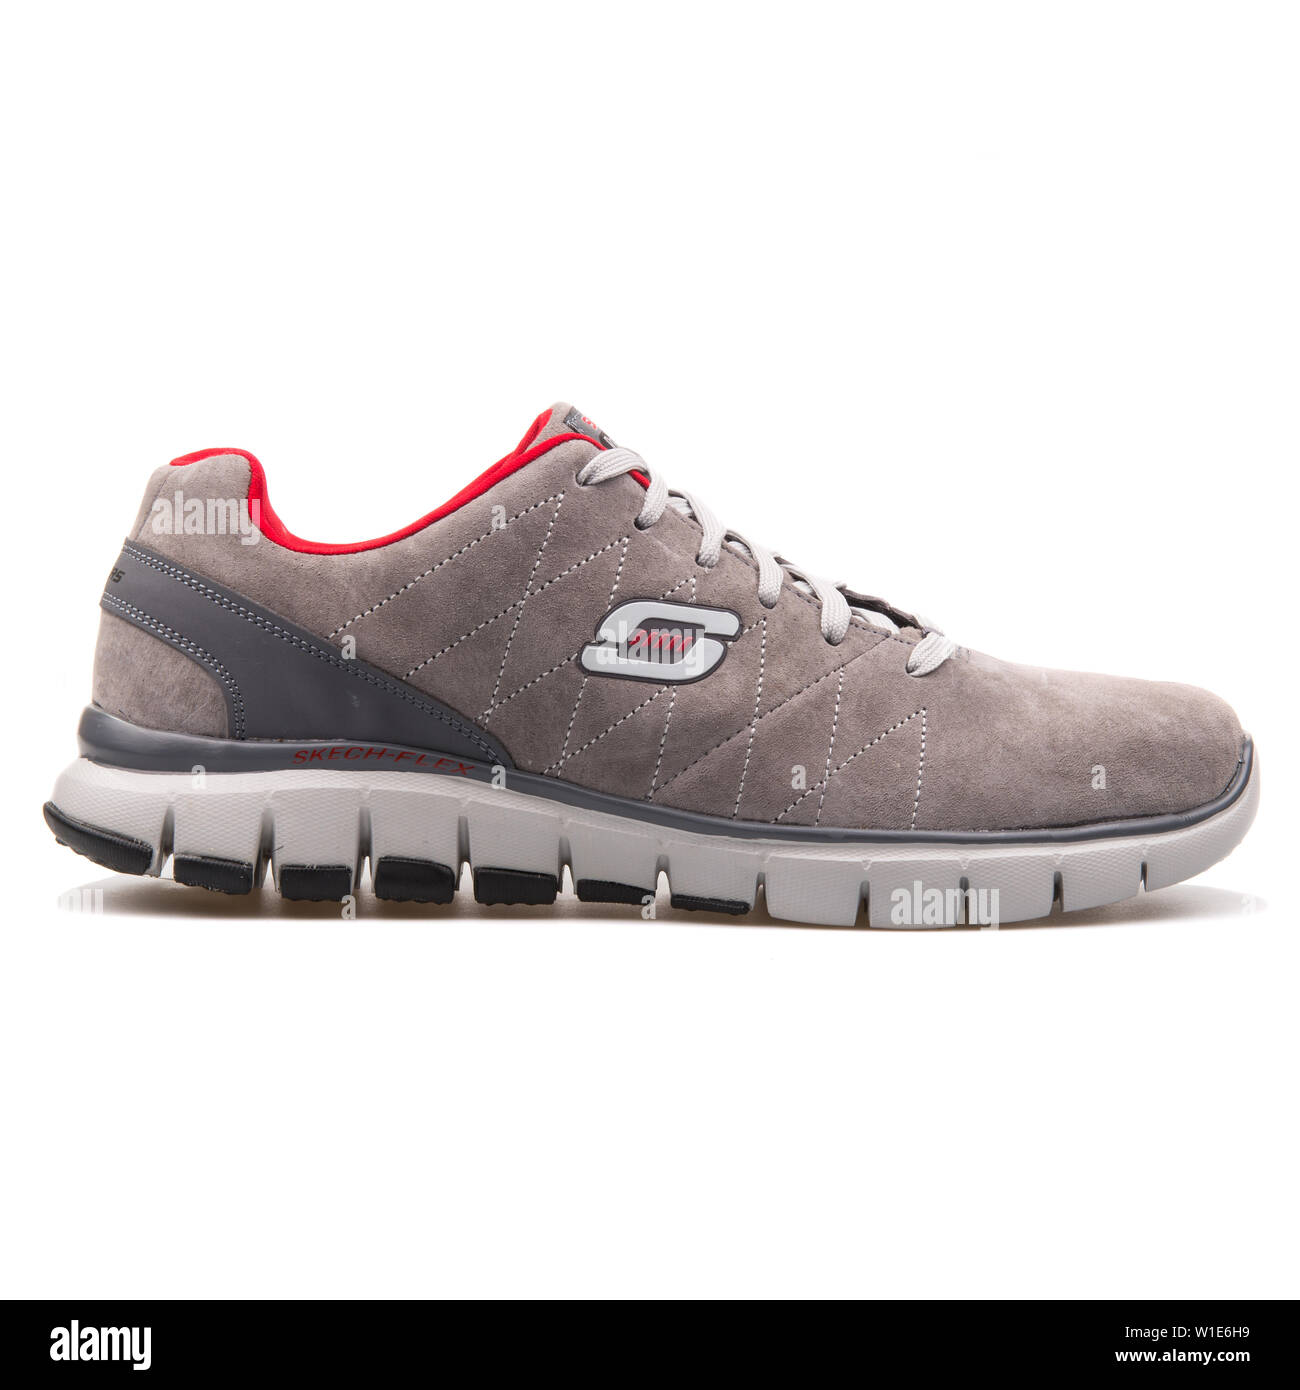 encender un fuego Comunismo correr zapatillas skechers 2017 Cheaper Than Retail Price> Buy Clothing,  Accessories and lifestyle products for women & men -